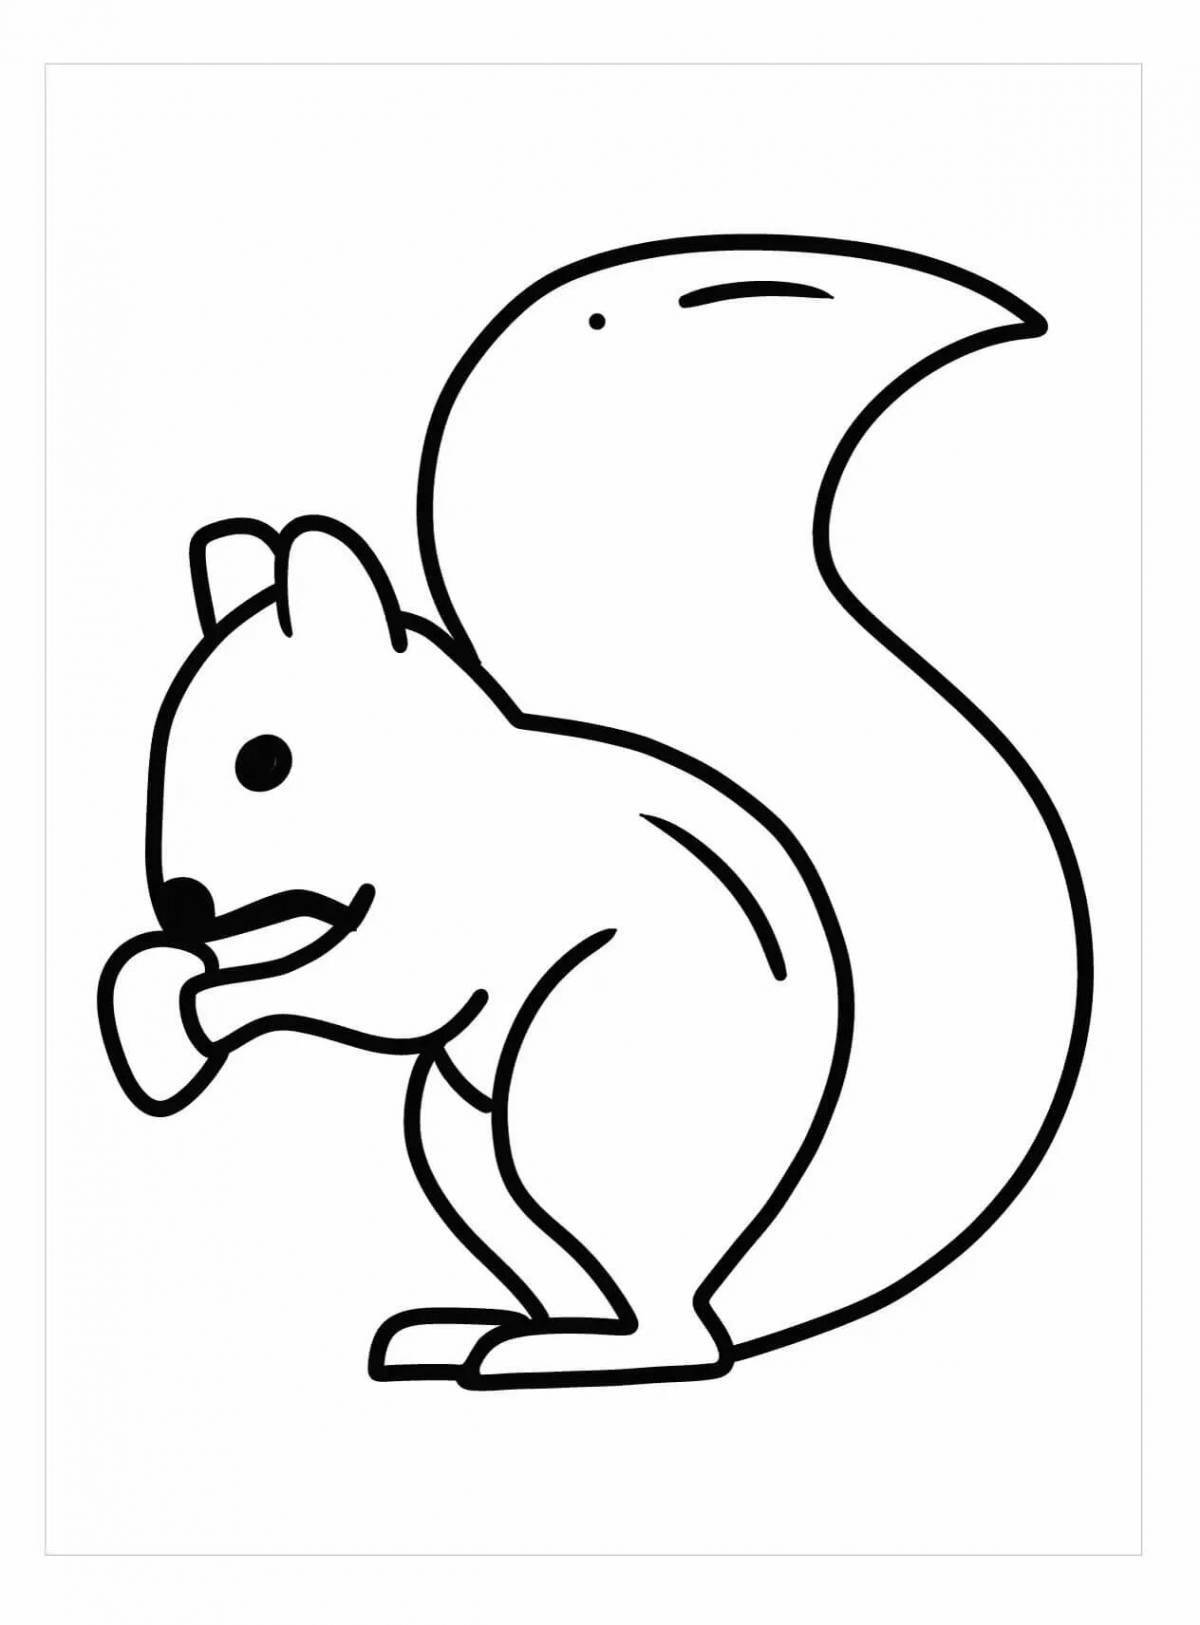 Bright coloring squirrel for children 6-7 years old